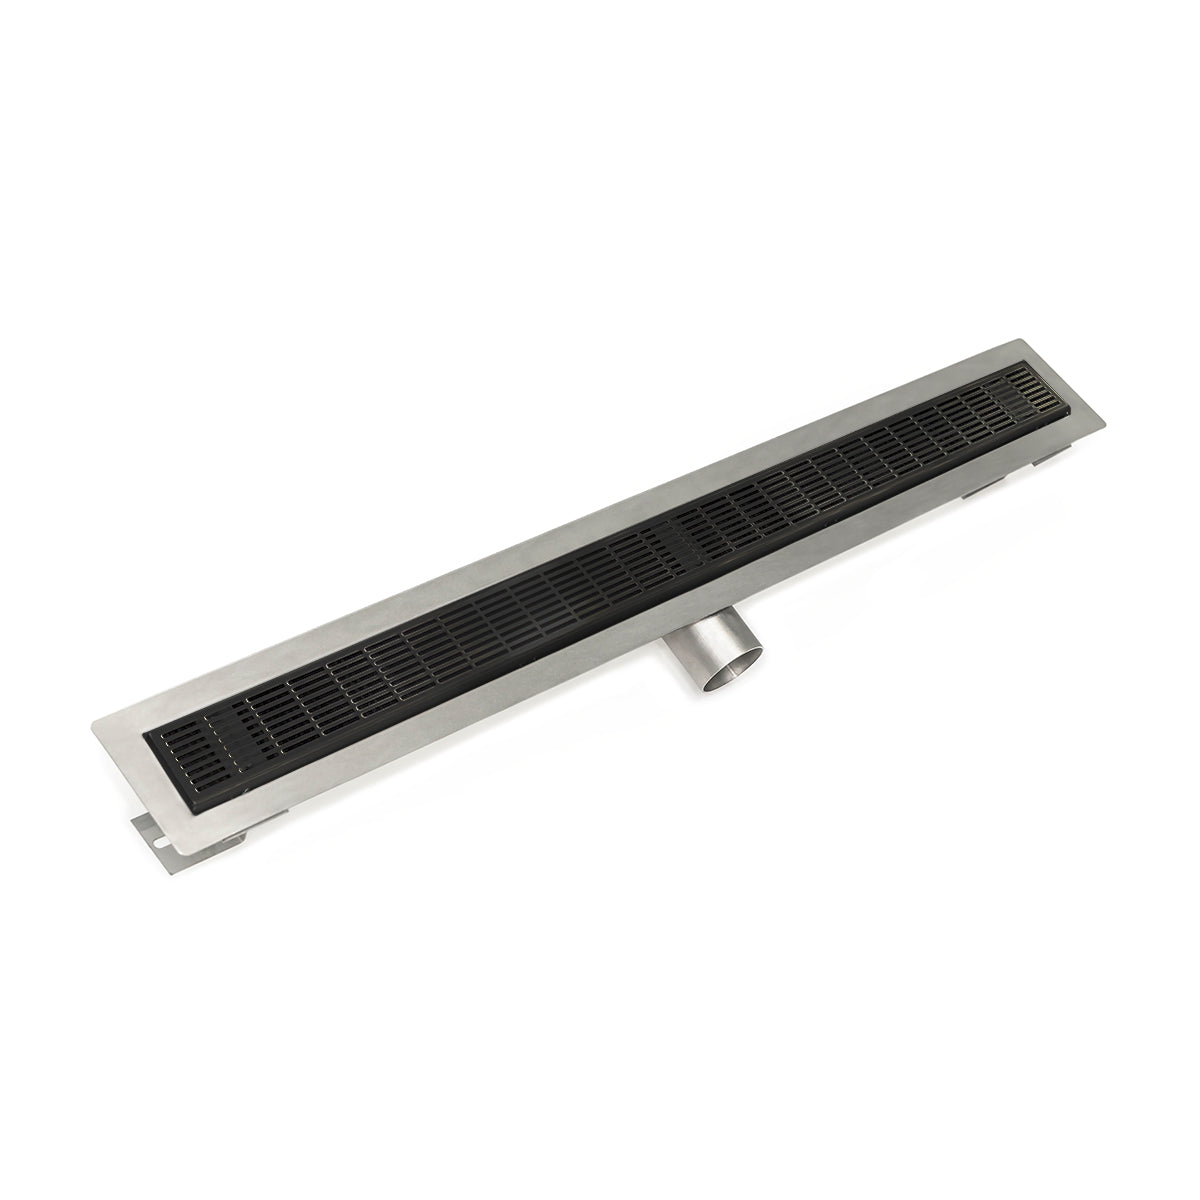 Infinity Drain 42" FT Series Side Outlet Linear Drain Kit with 2 1/2" Perforated Slotted Grate